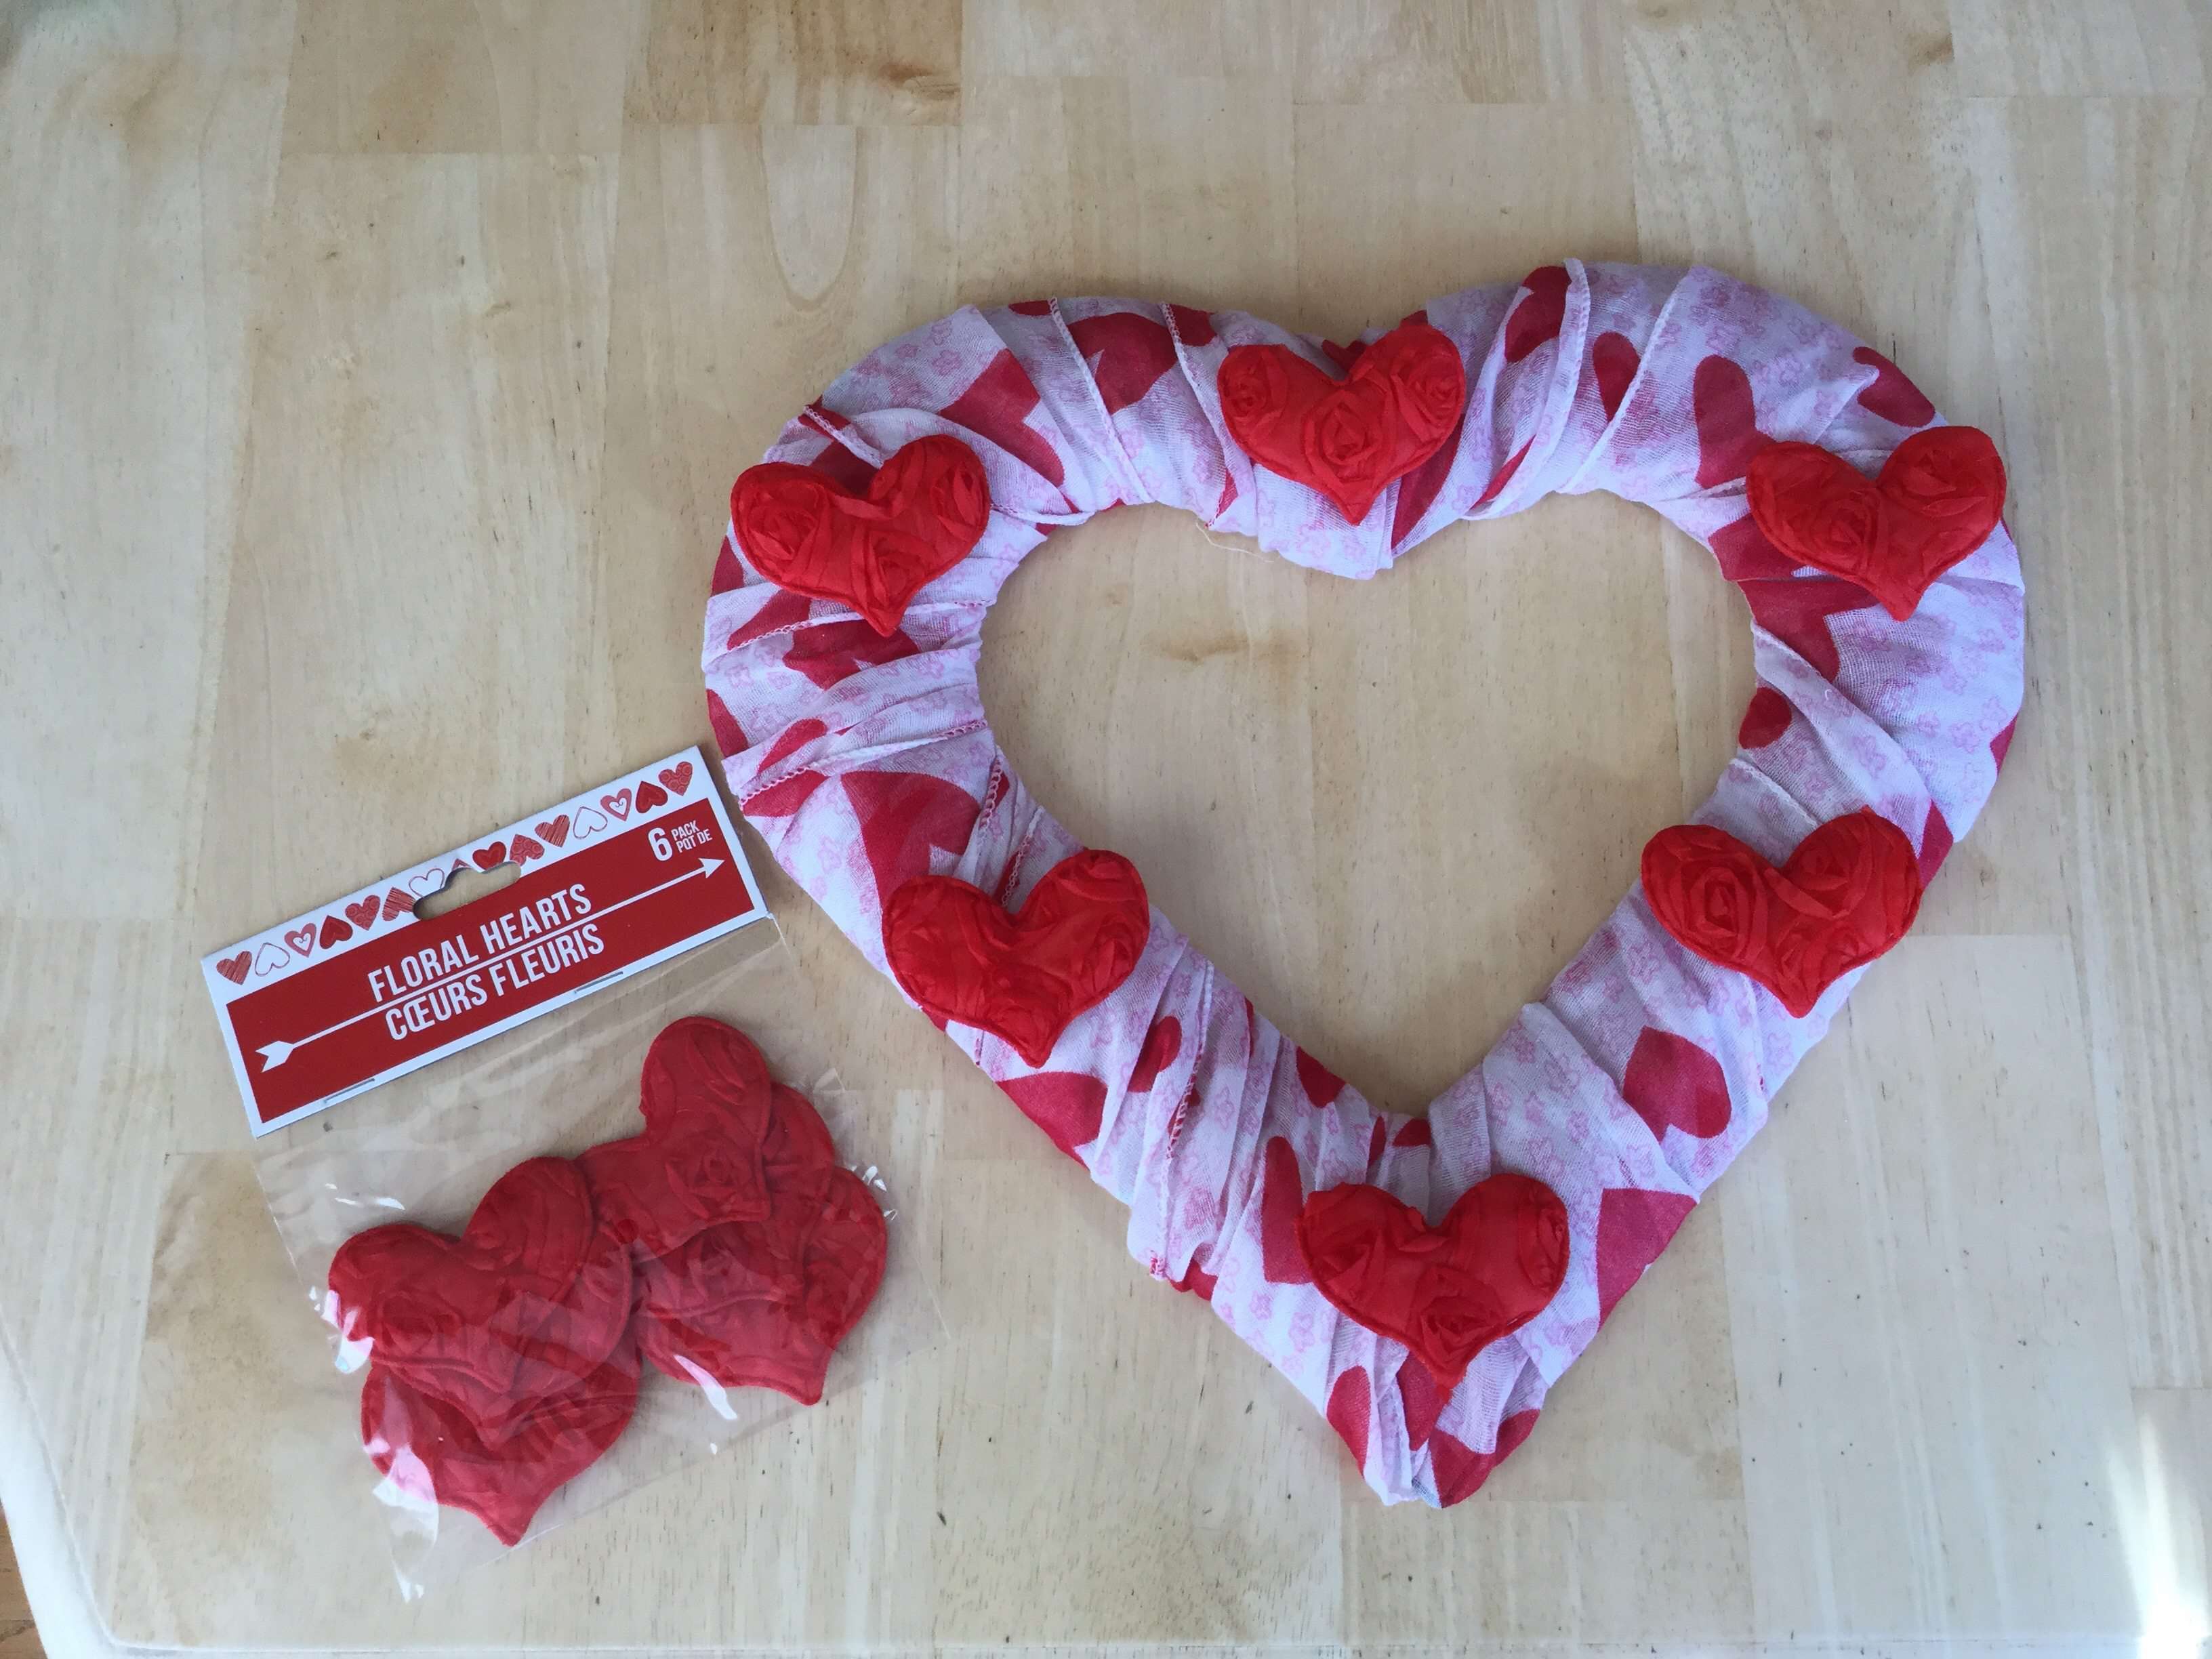 Place your fabric heart stickers onto the scarves where desired.